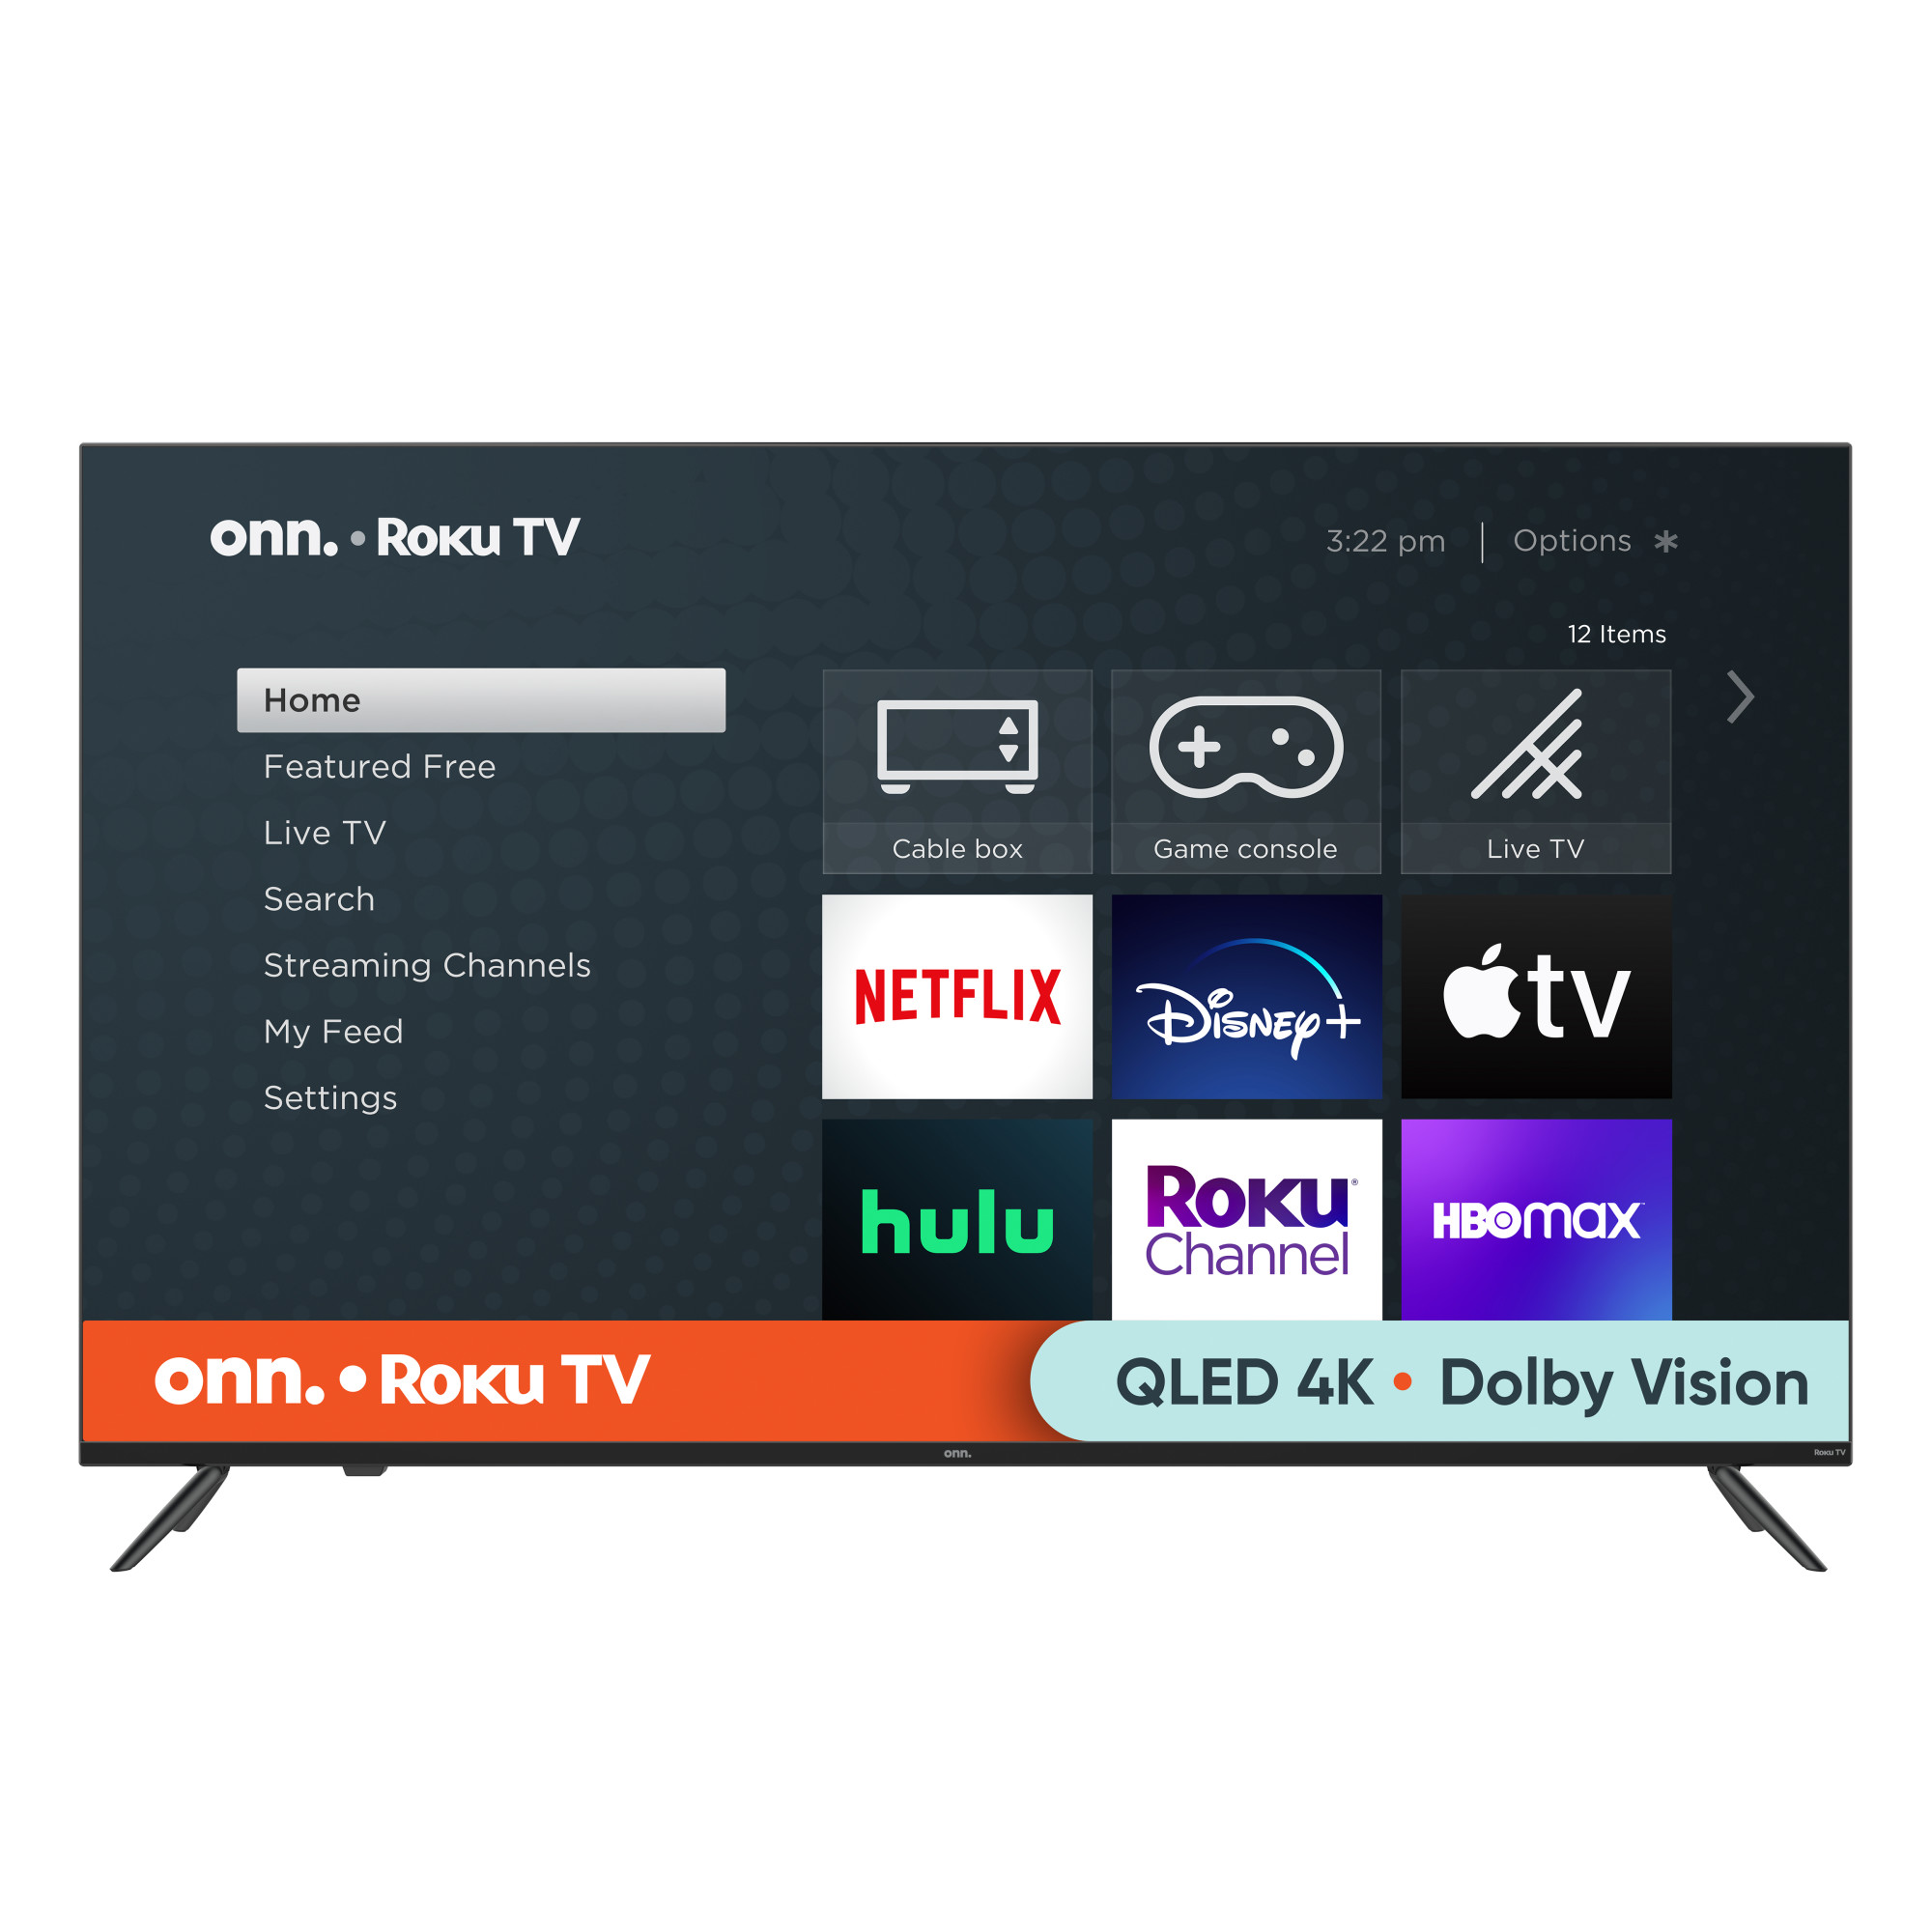 onn. 55” QLED 4K UHD (2160p) Roku Smart TV with Dolby Atmos, Dolby Vision, Local Dimming, 120hz Effective Refresh Rate, and HDR (100071701) - image 4 of 17